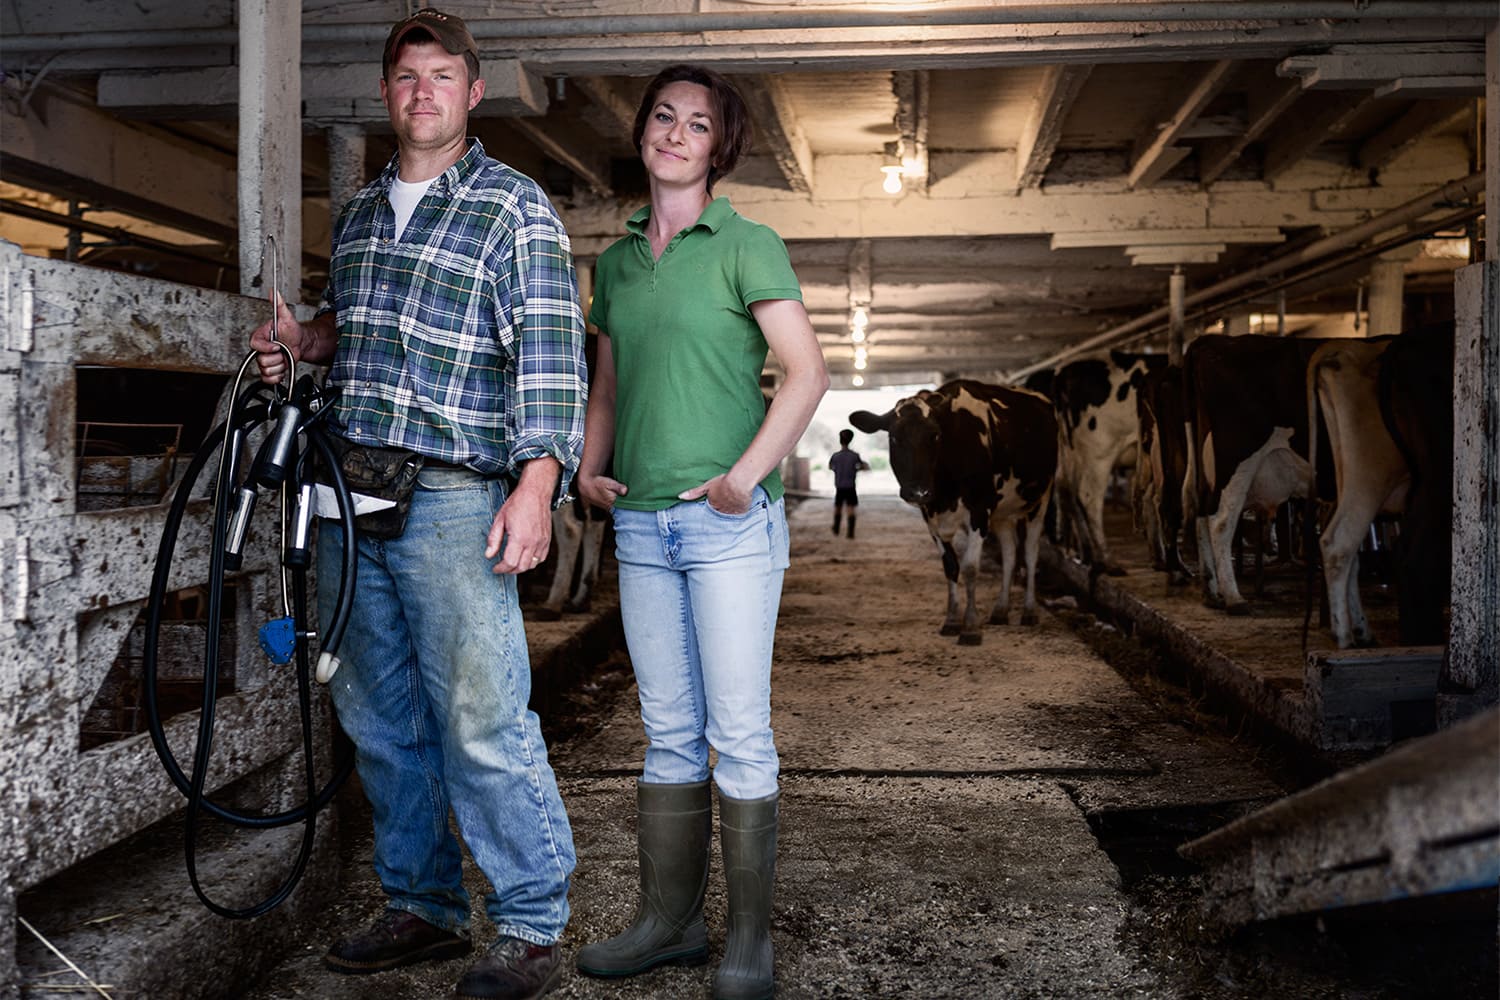 Male-Female-Dairy-Farmers-portrait-barn-with-cows-Rod-McLean